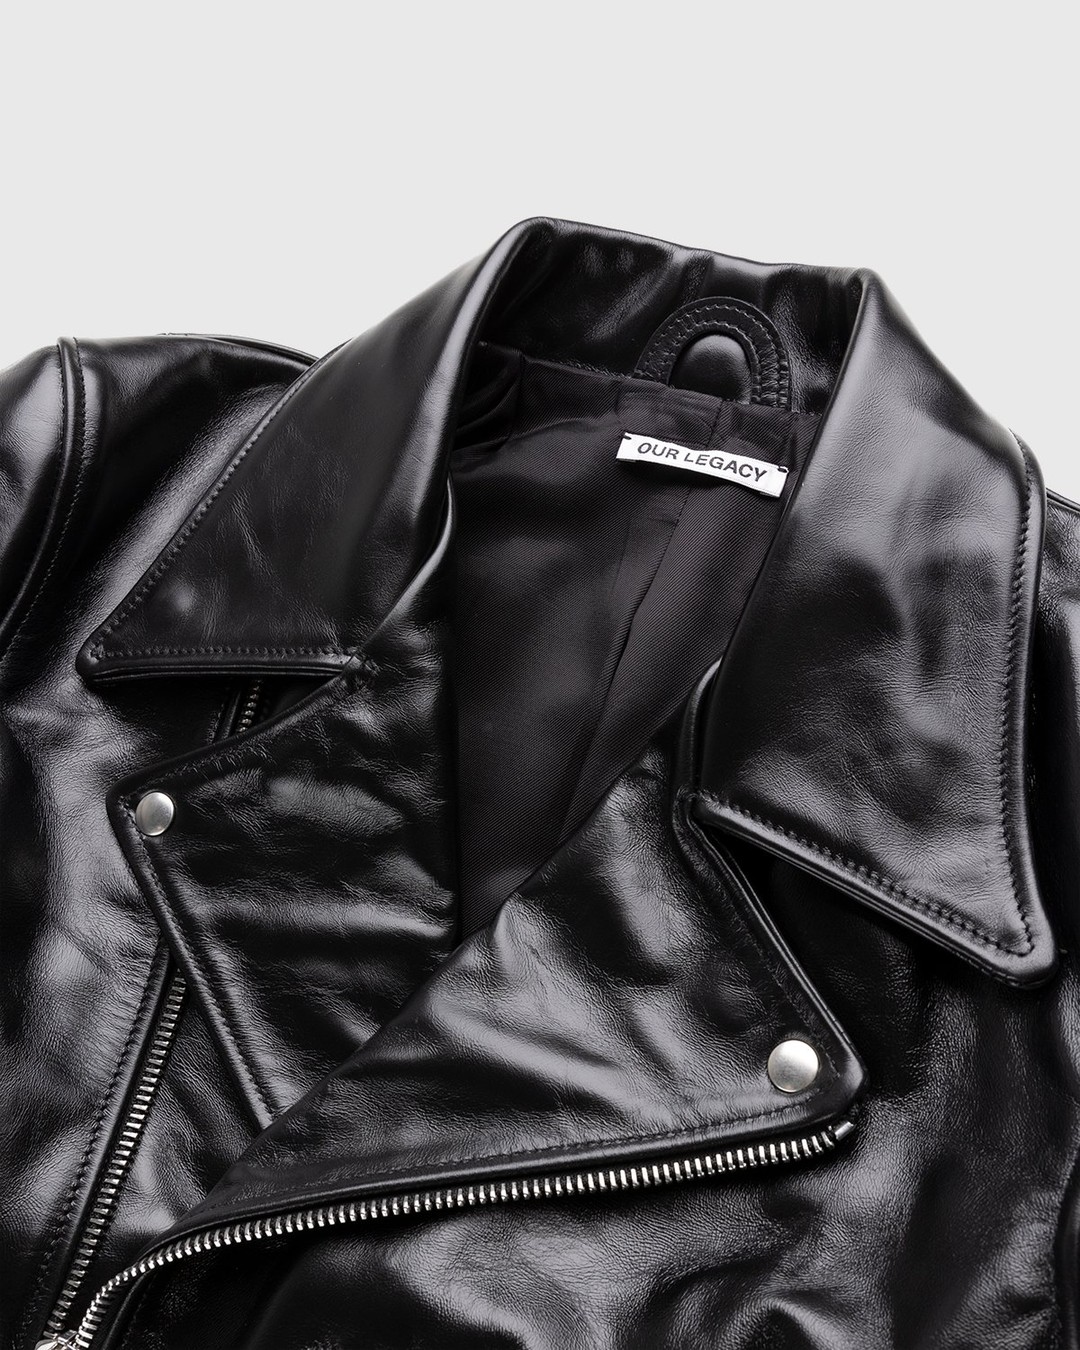 Our Legacy – Hellraiser Leather Jacket Aamon Black - Outerwear - Black - Image 3